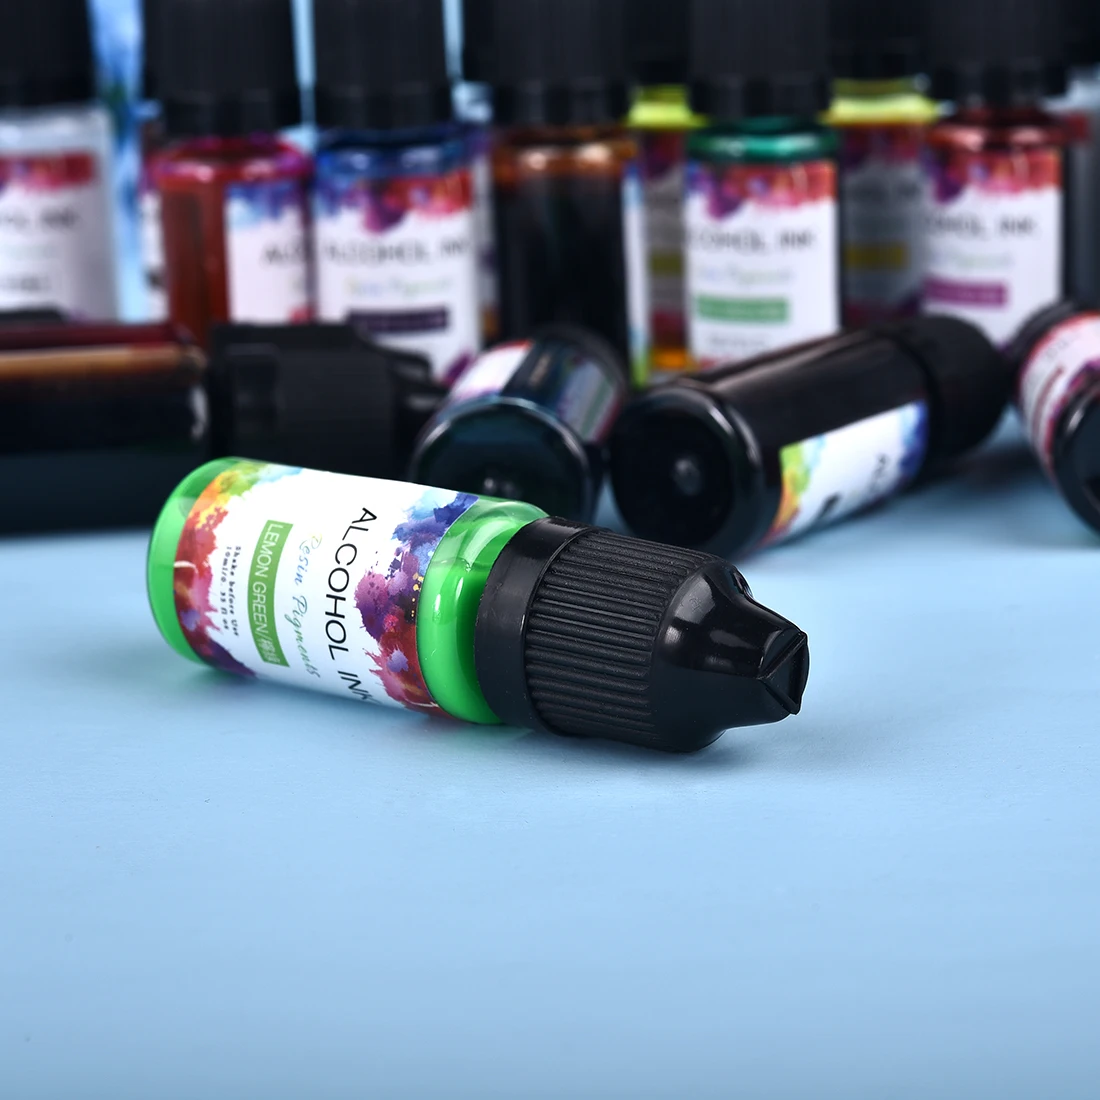 

22 Color DIY Halo Dye Ink Diffusion UV Epoxy Resin Pigment Art Ink Alcohol Liquid Colorant For Resin Crafts Jewelry Making Tools